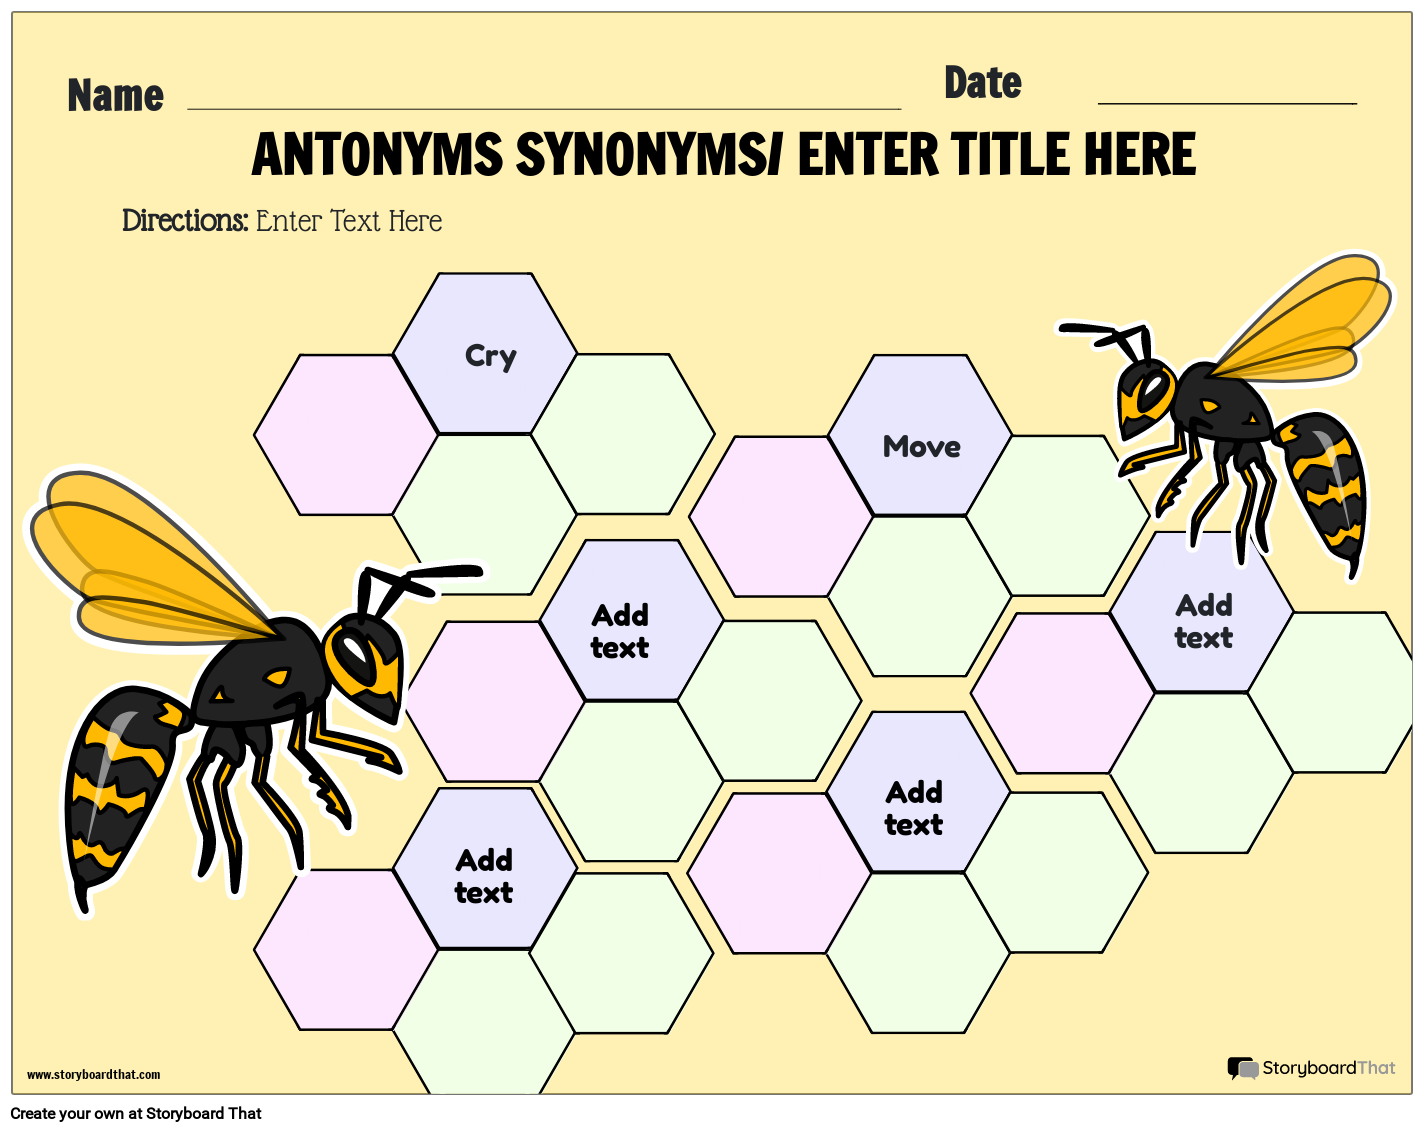 Printable Worksheet for Antonyms and Synonyms